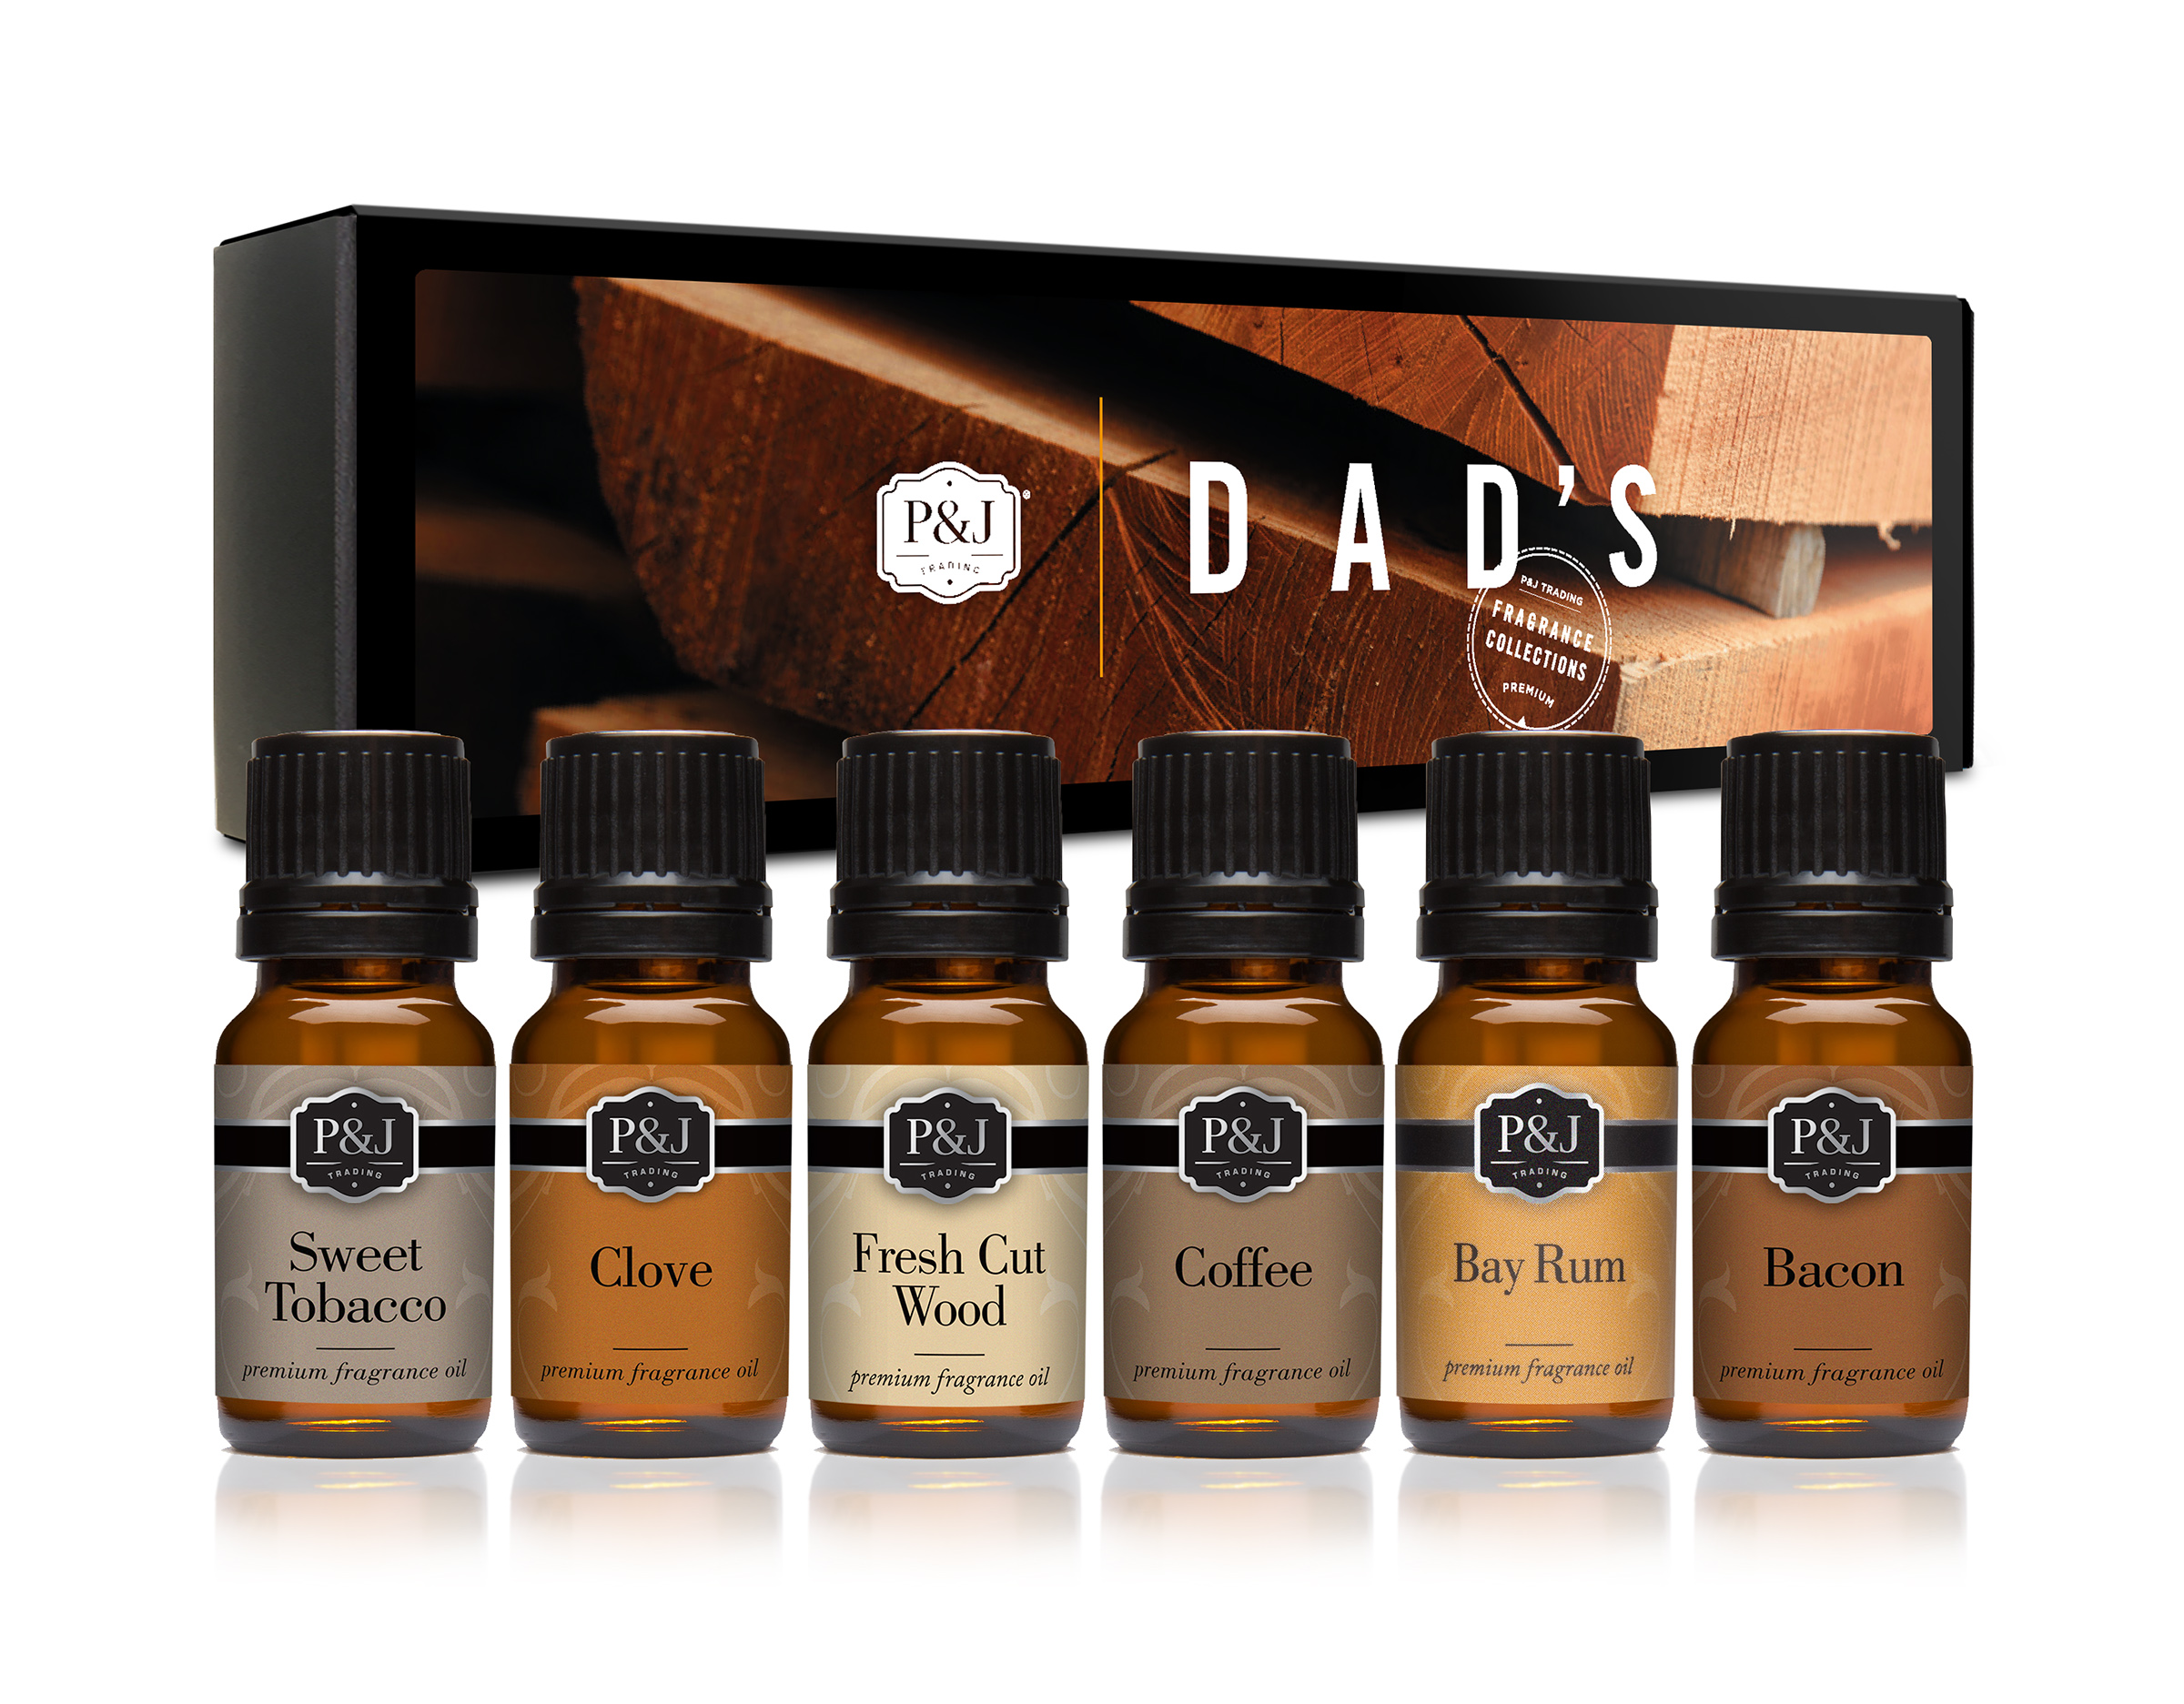 P&j Fragrance Oil | Dads Set of 6 - Scented Oil for Soap Making, Diffusers, Candle Making, Lotions, Haircare, Slime, and Home Fragrance